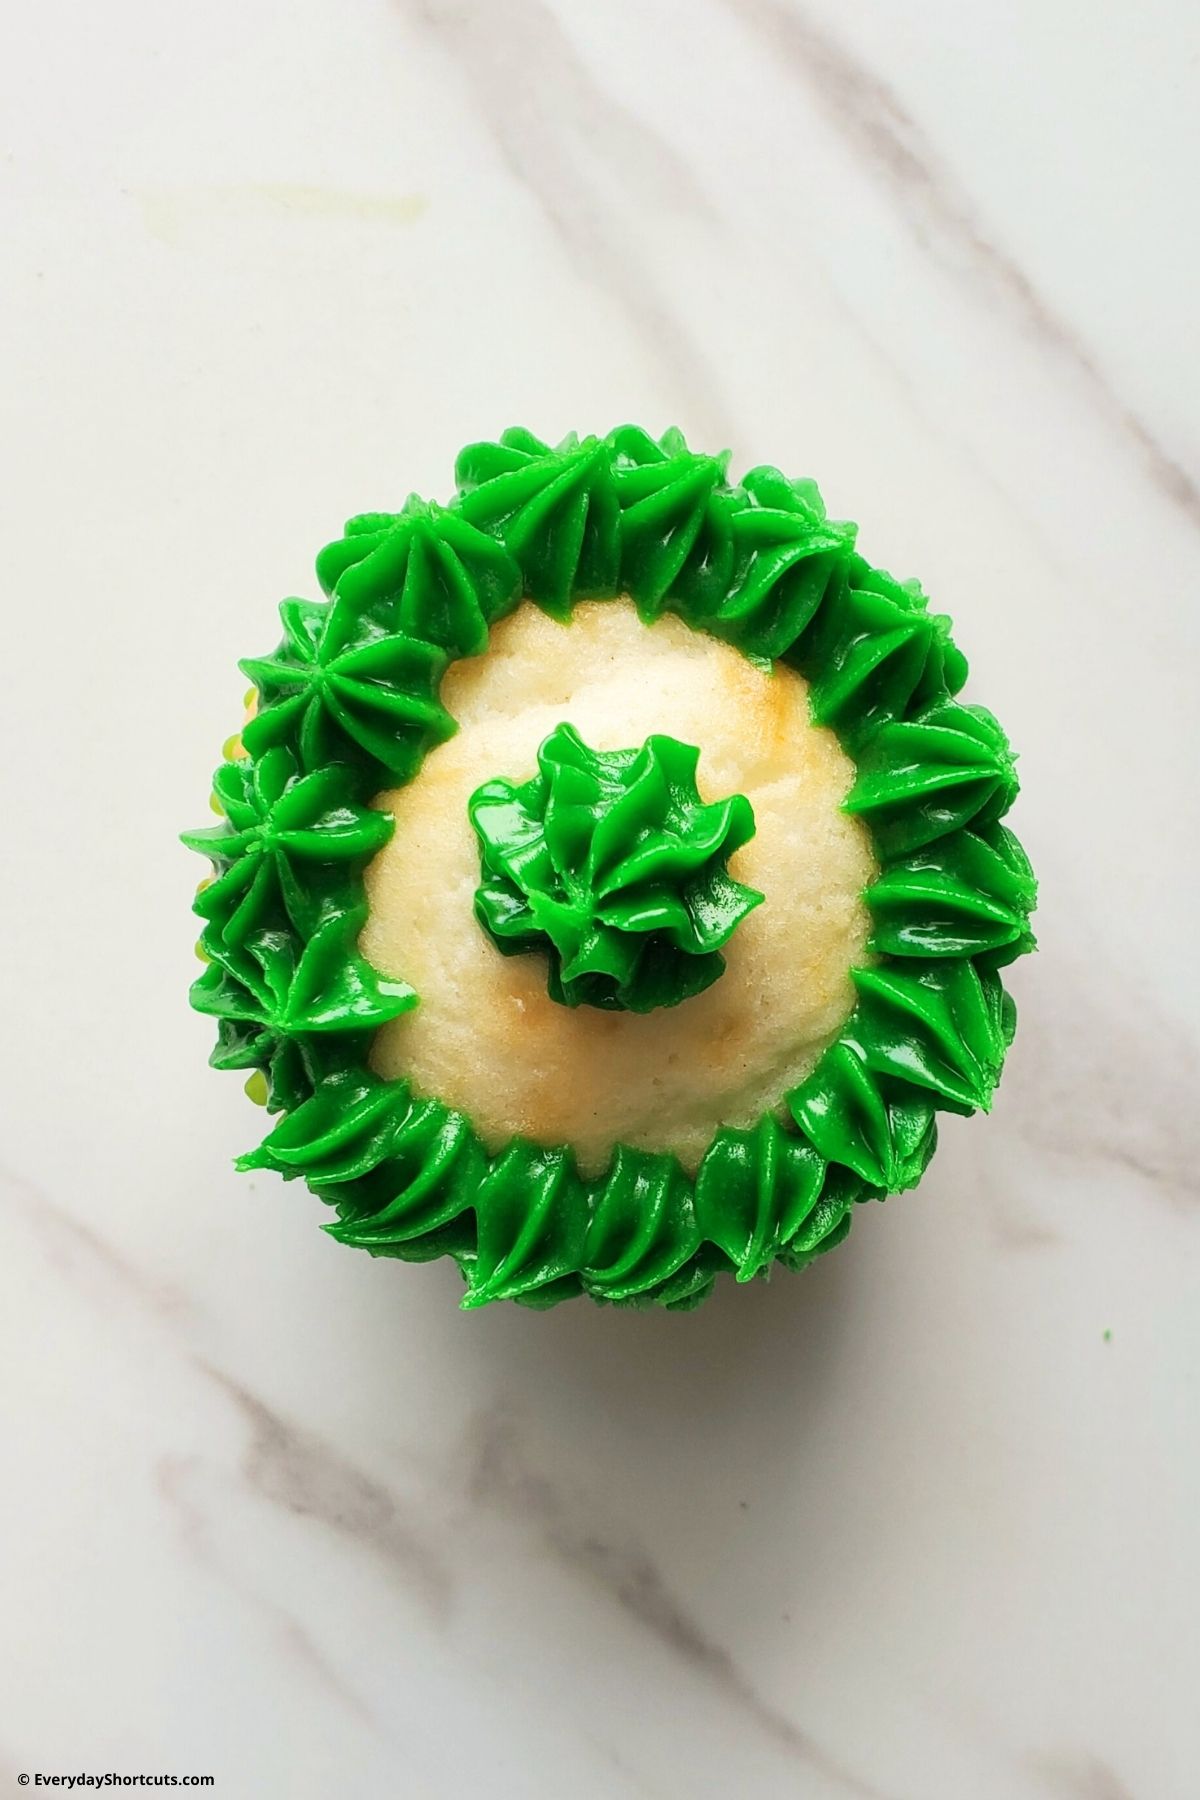 green frosting in a circle on a cupcake